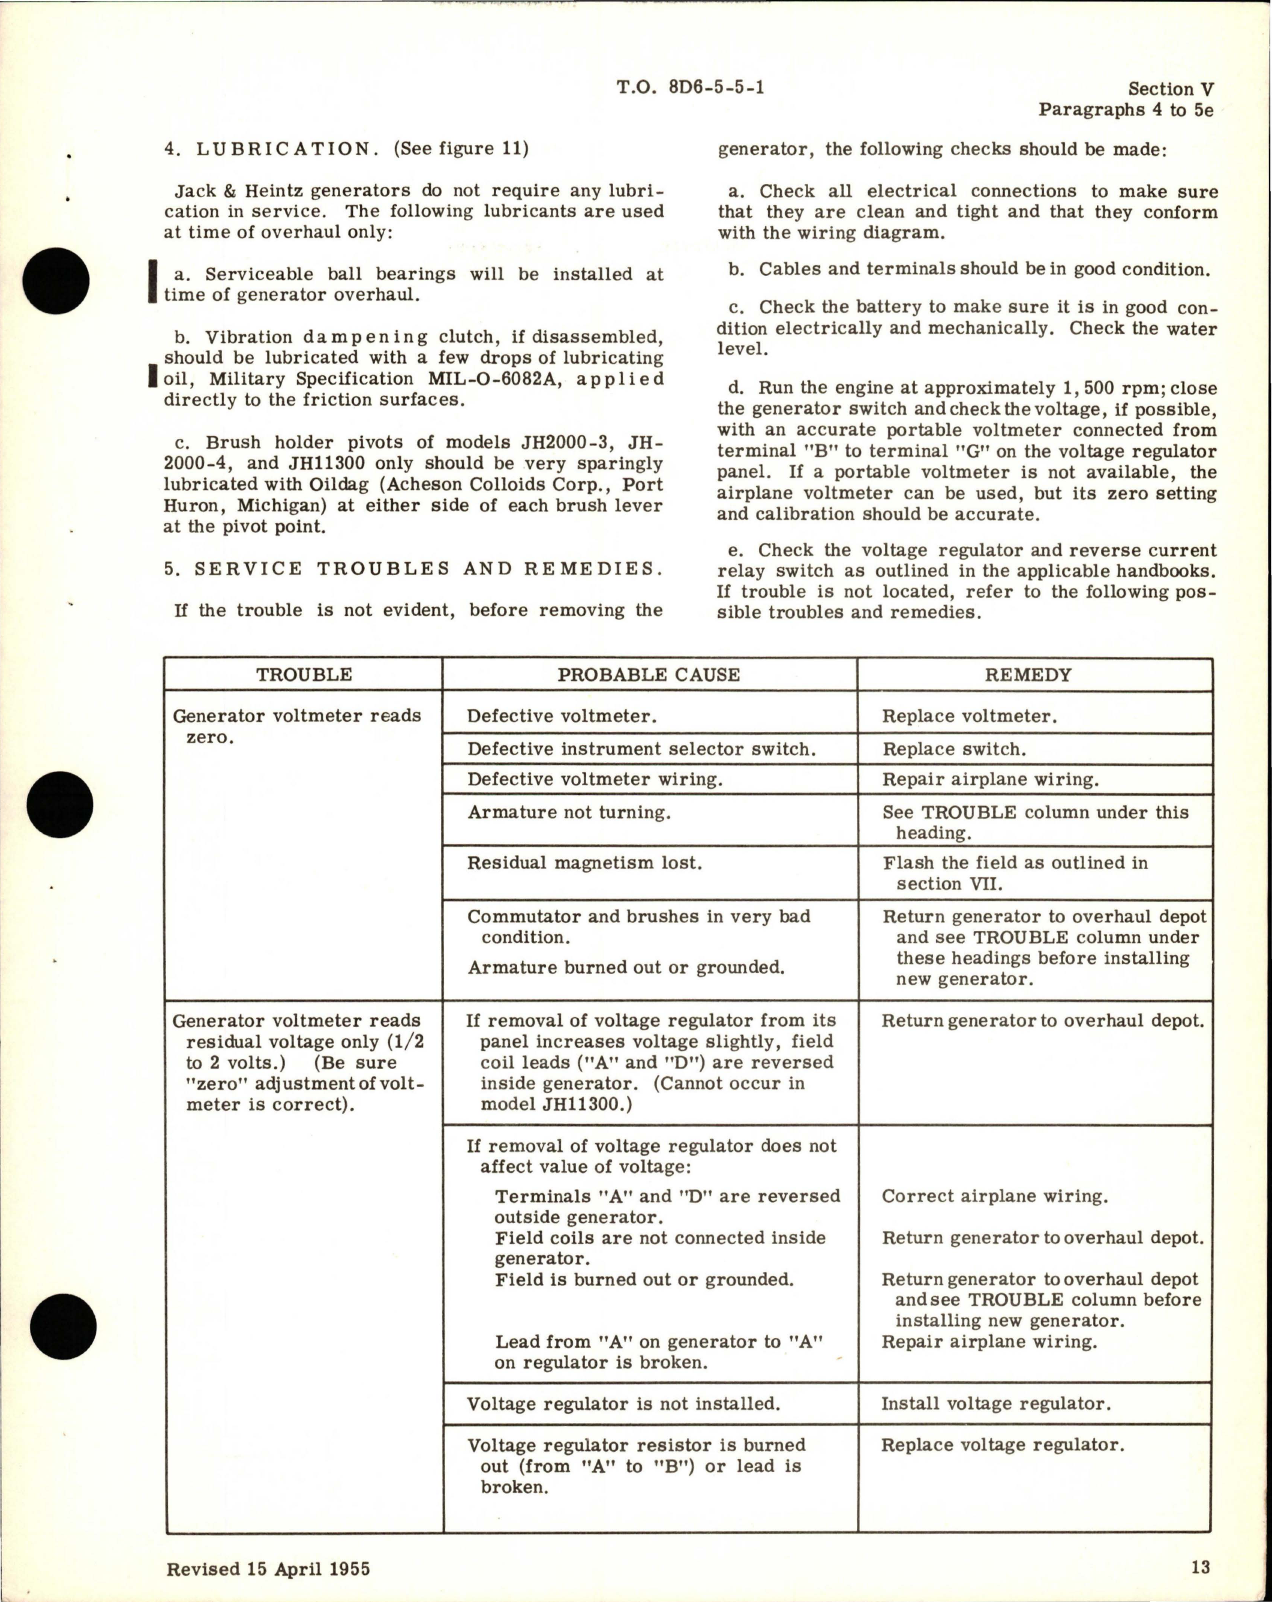 Sample page 5 from AirCorps Library document: Operation, Service, Overhaul Instructions with Parts Catalog for Generators, Types R-1 and R-2